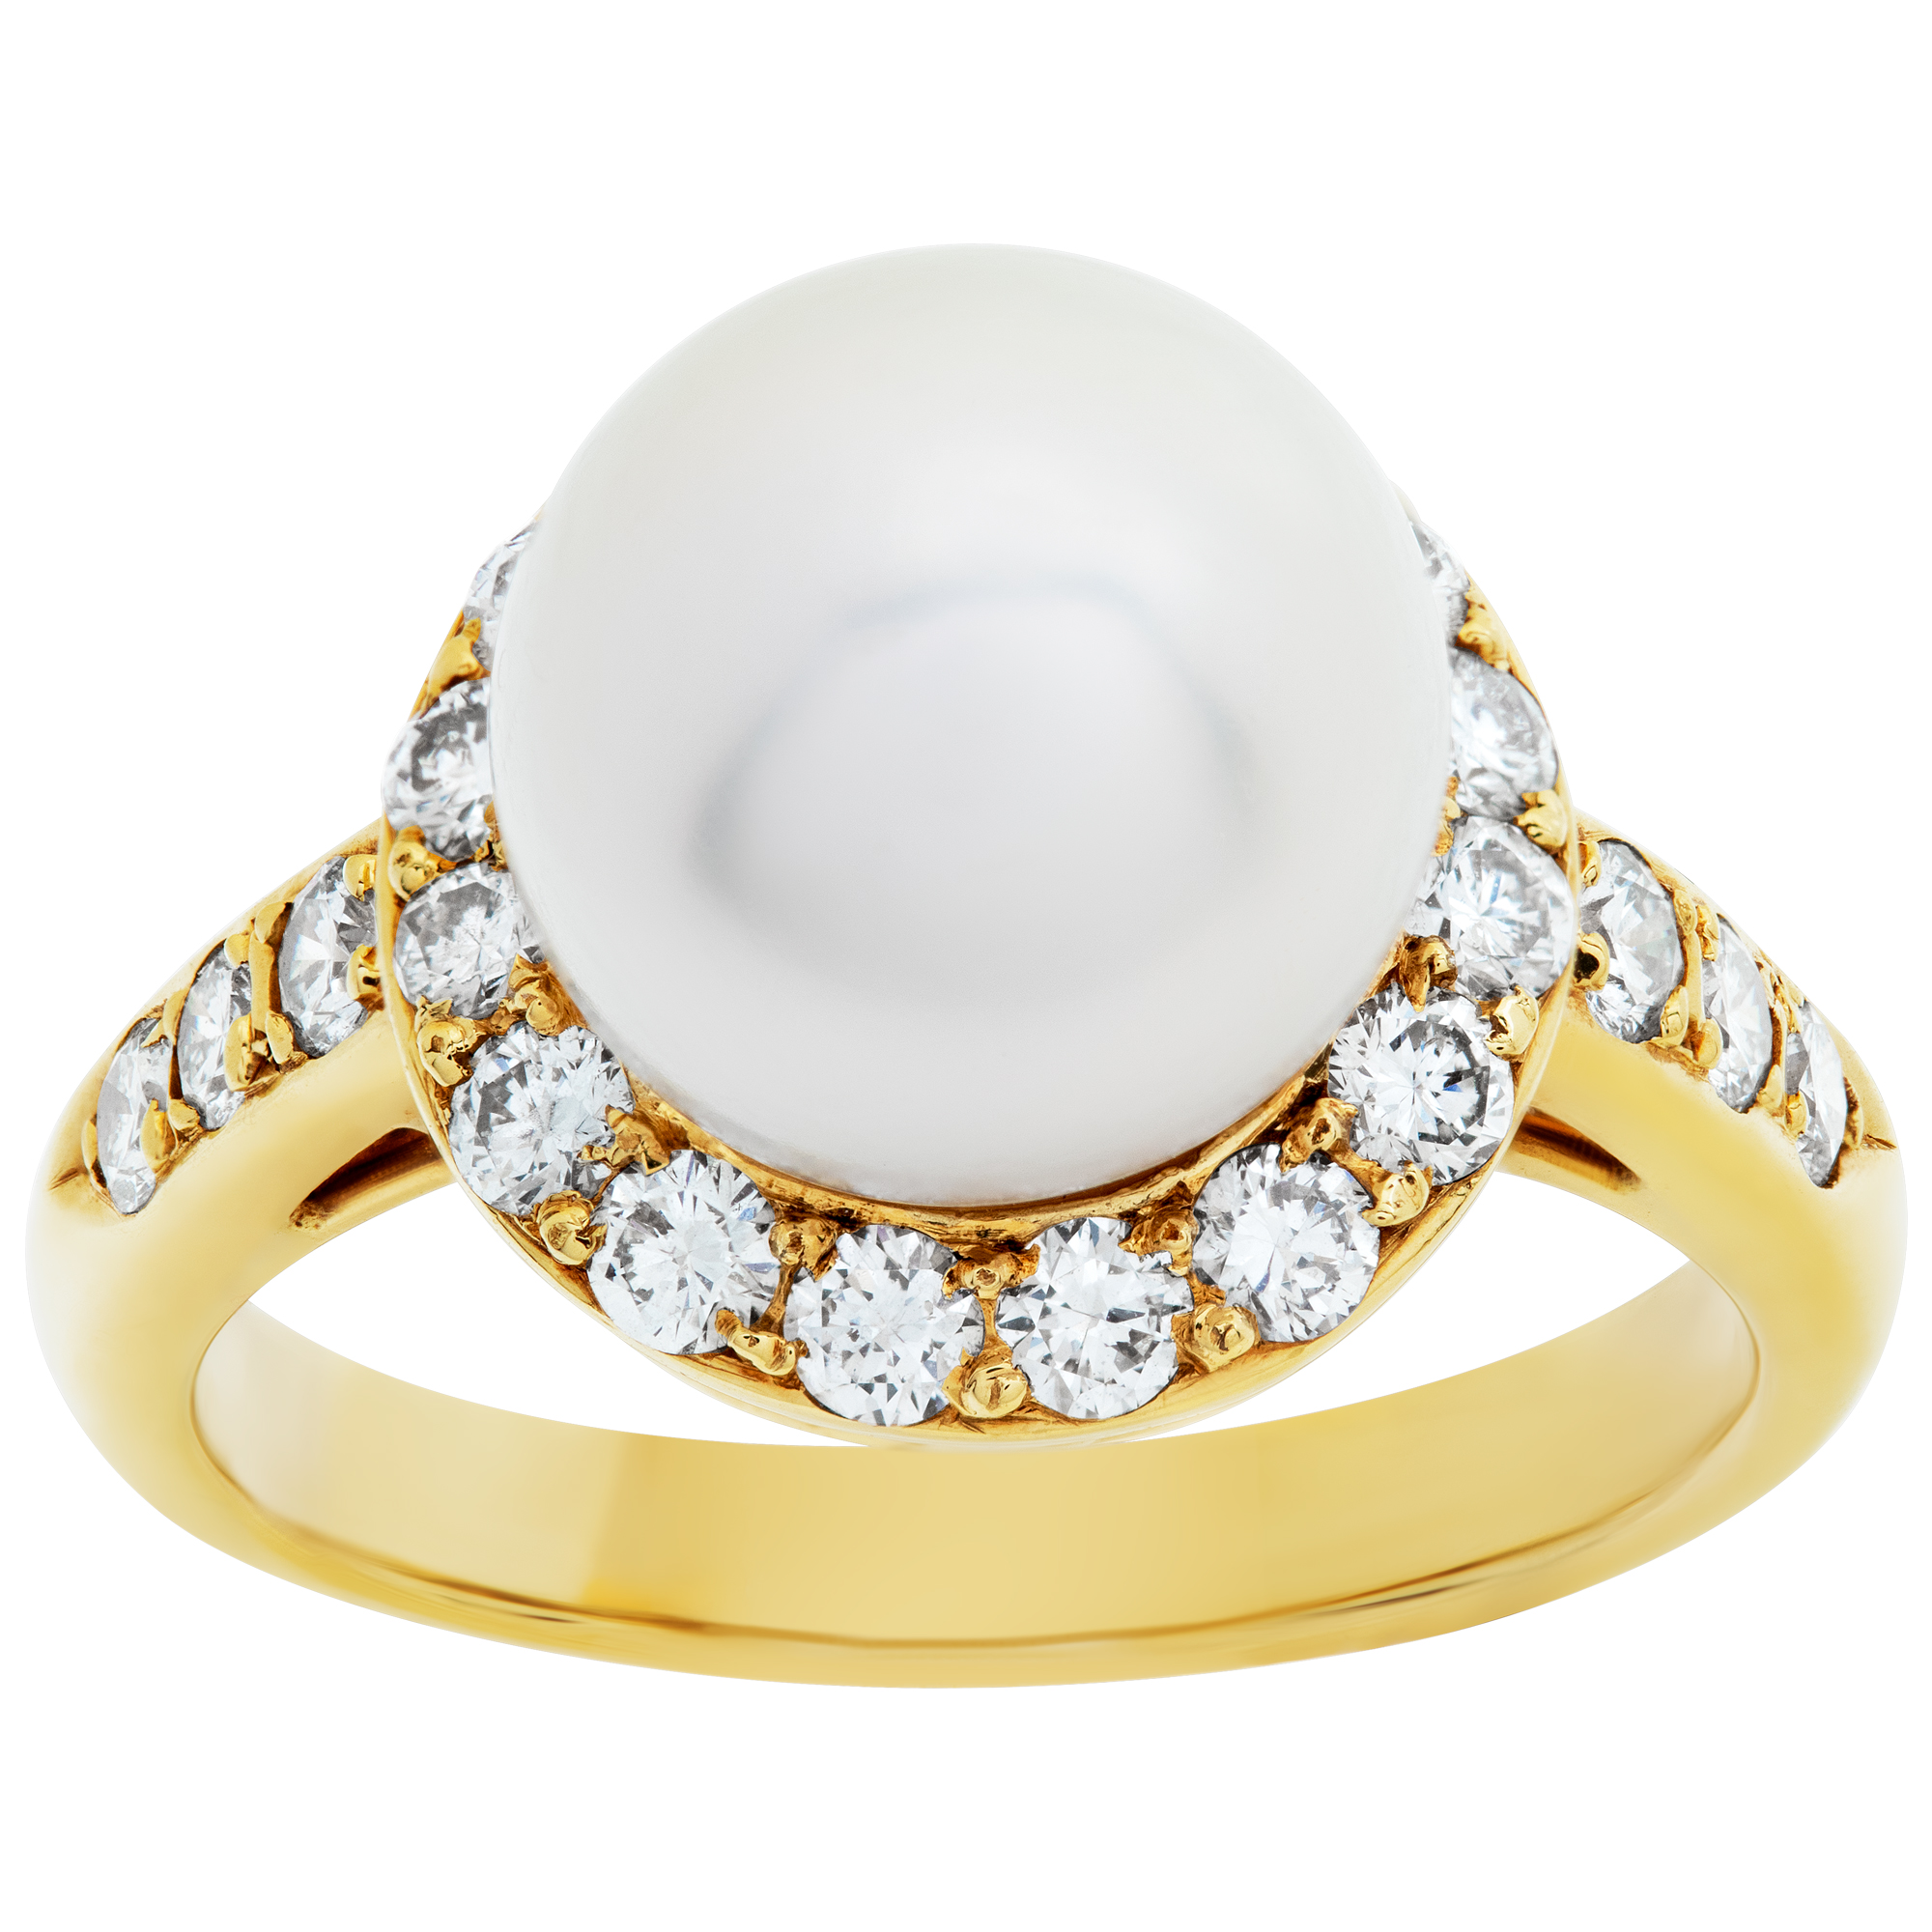 Pearl ring in 18k yellow gold with an approximate 1.30 carats in accent diamonds